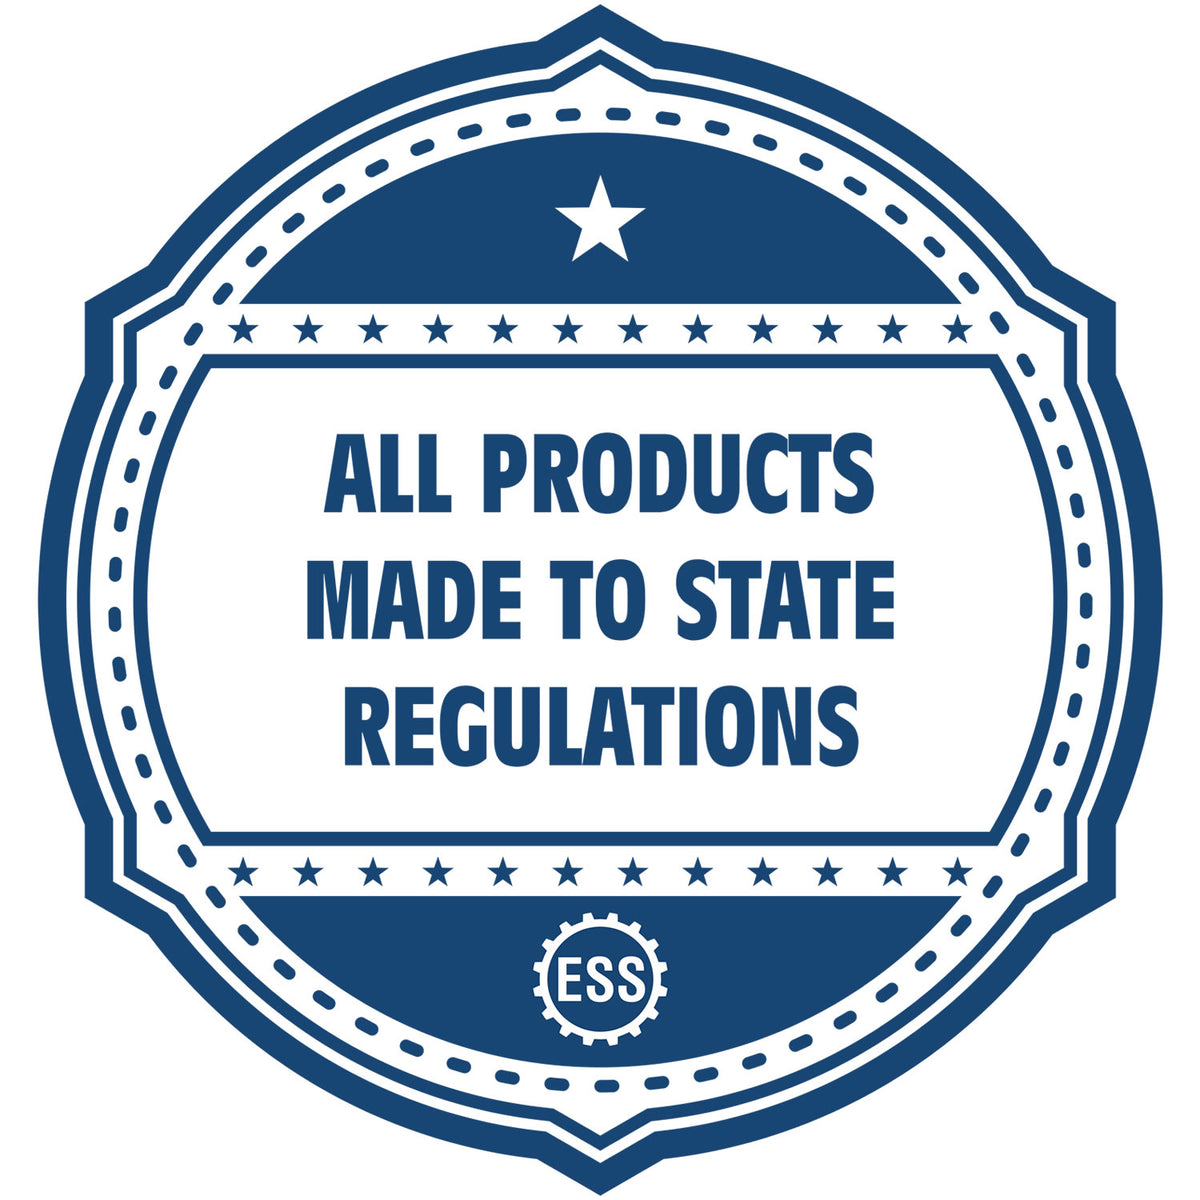 An icon or badge element for the Oklahoma Desk Architect Embossing Seal showing that this product is made in compliance with state regulations.